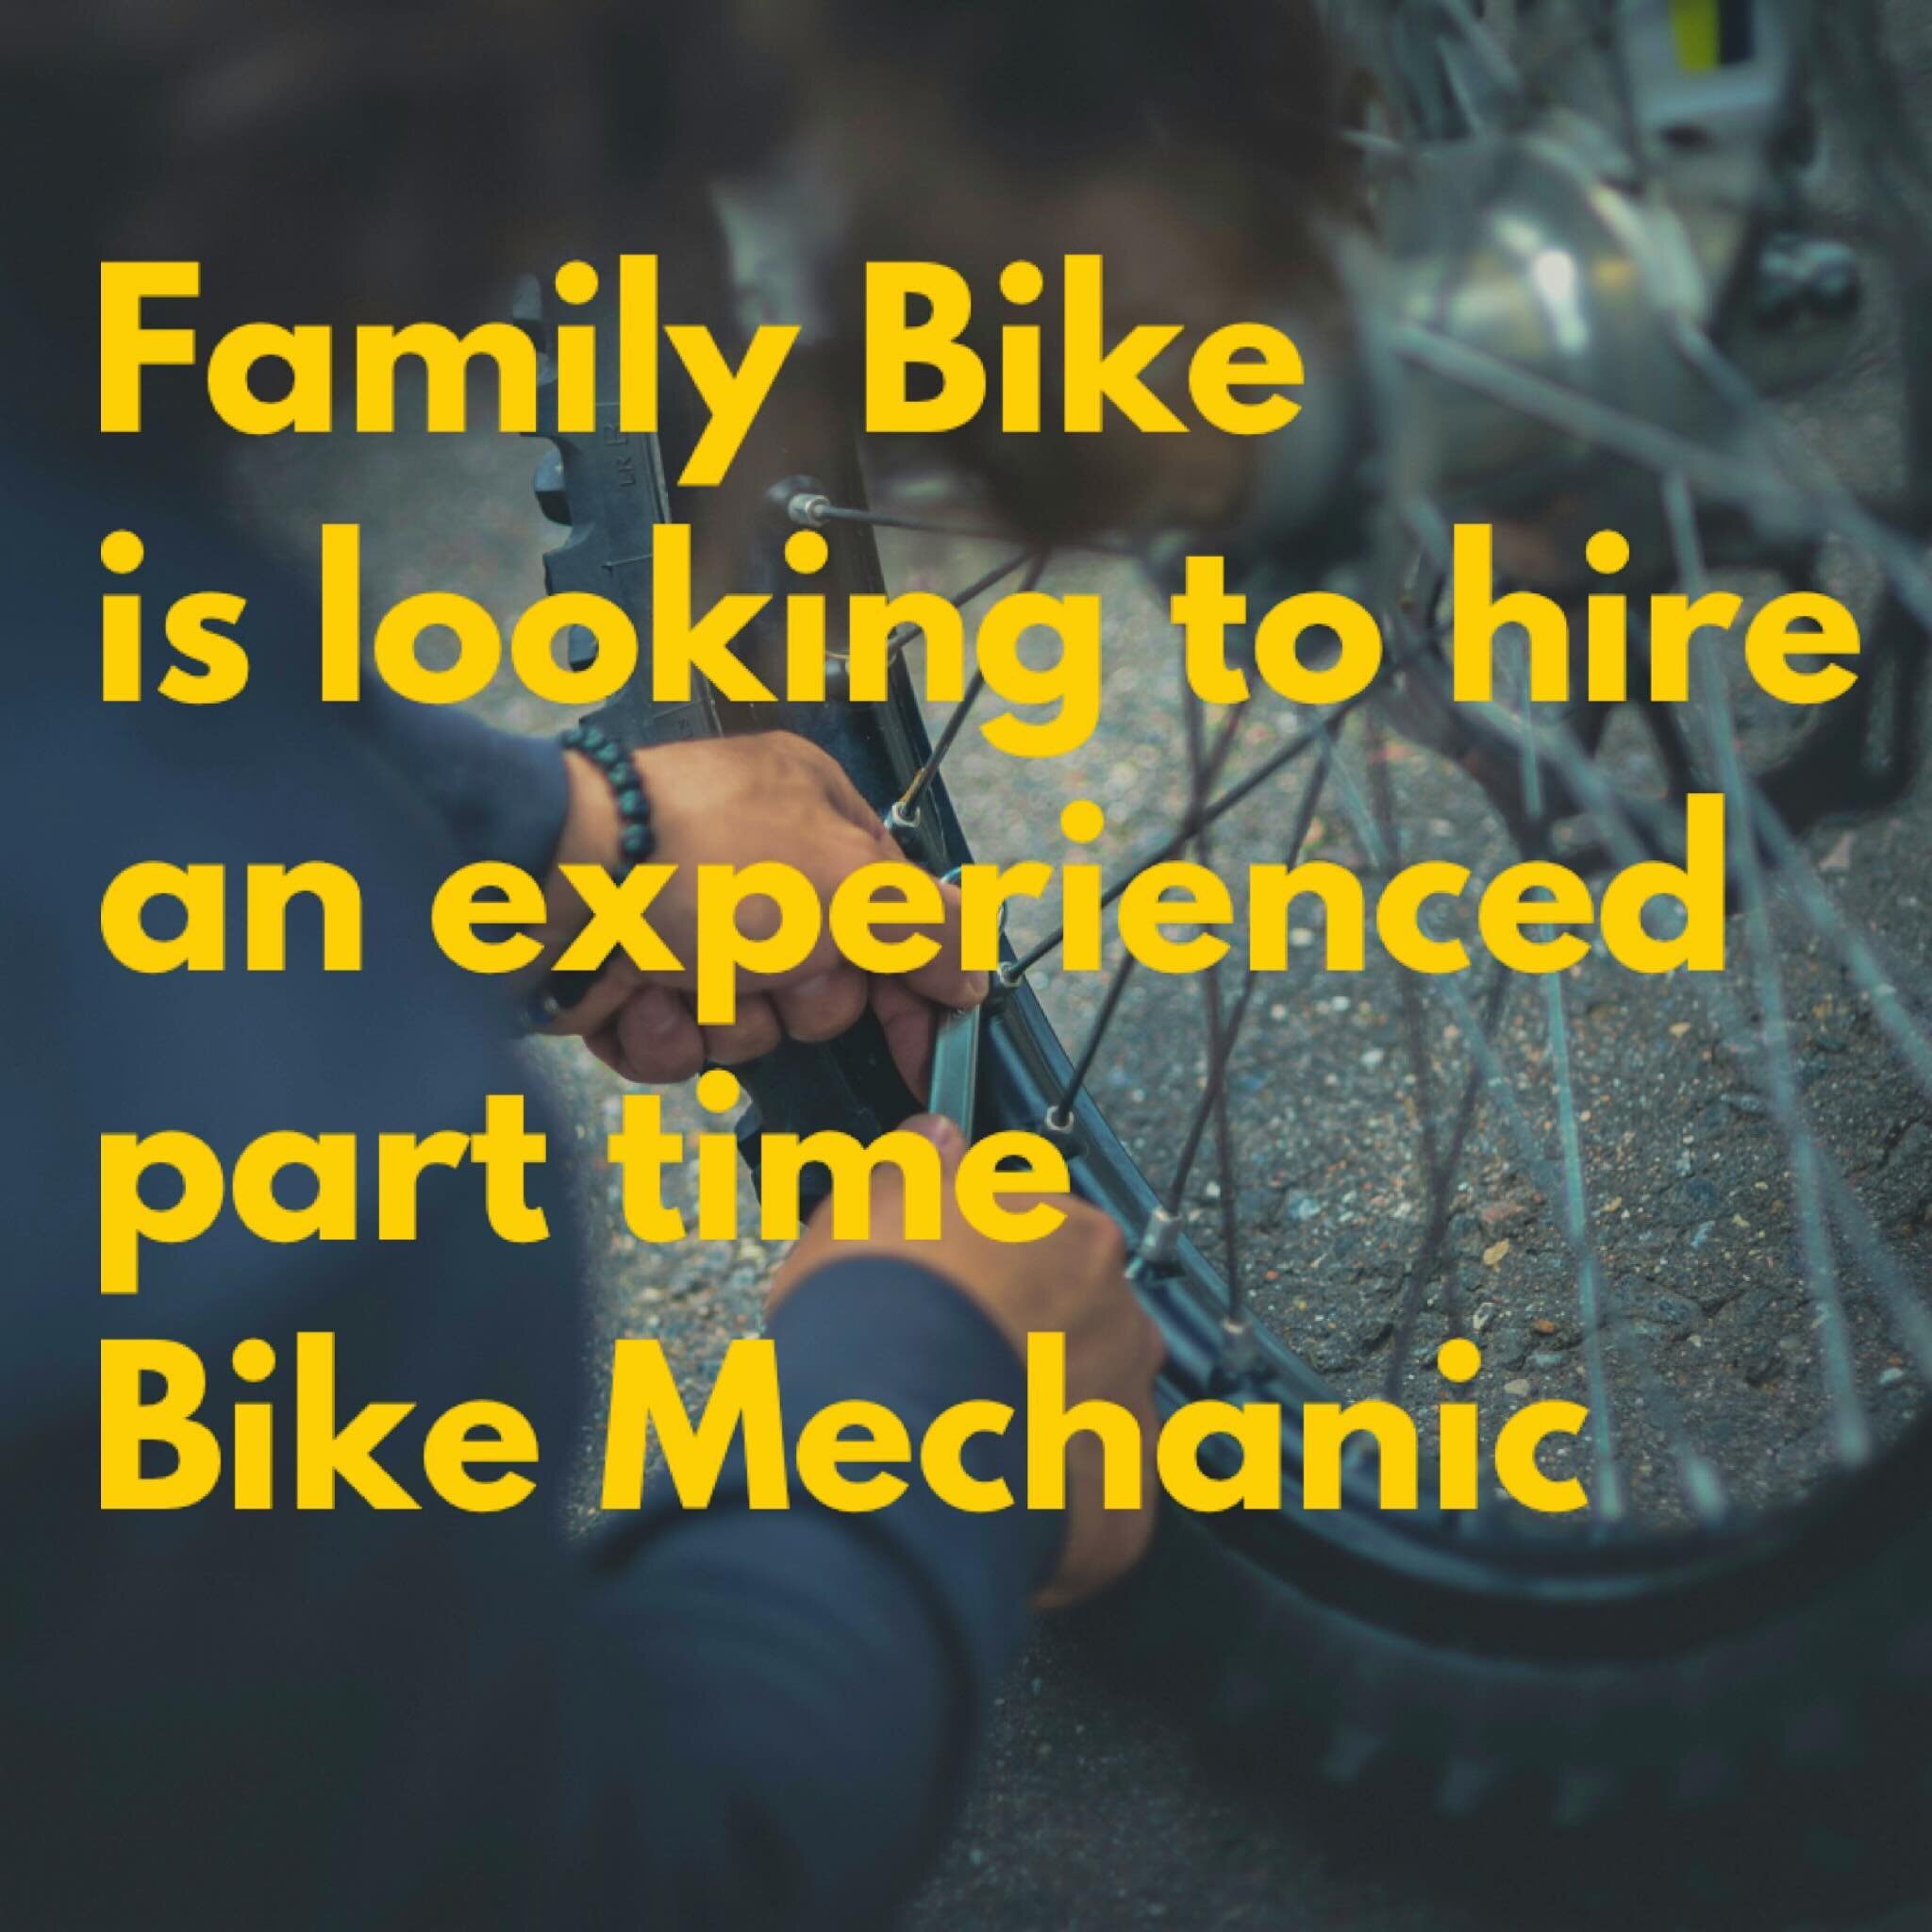 Are you an experienced bike mechanic looking to pick up some hours? Family bike is looking for part time help. Call 413-525-2346, email familybike@me.com, stop in during regular business hours. Ask for Ray 👍#job #jobopening #familybike #bikemechanic